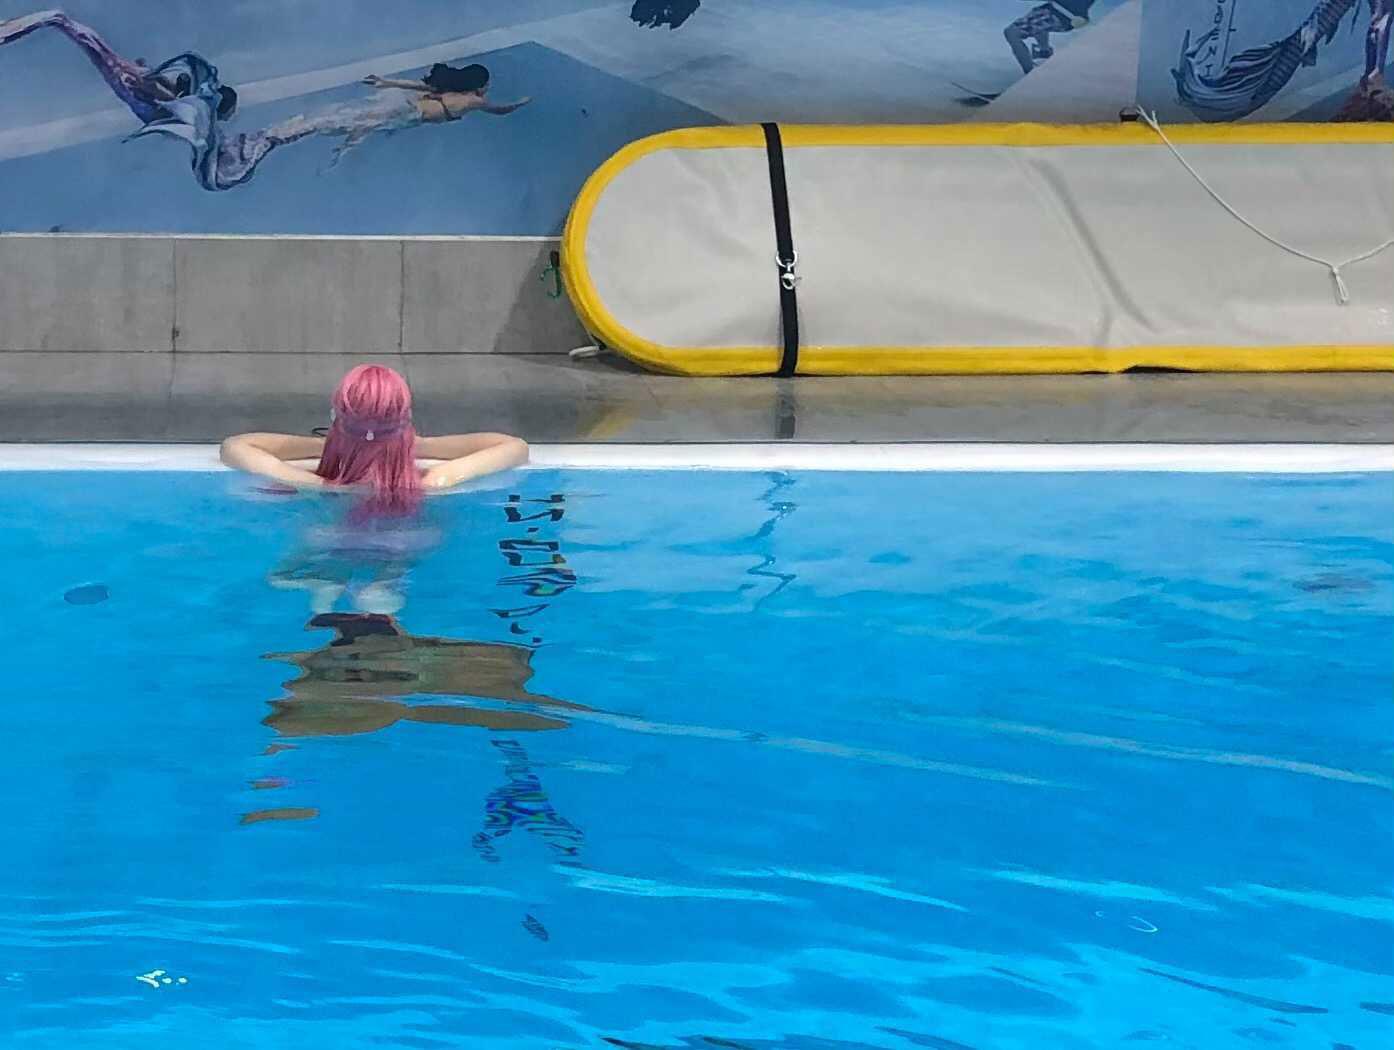 Chen Menke taking a rest from training to be a mermaid instructor.